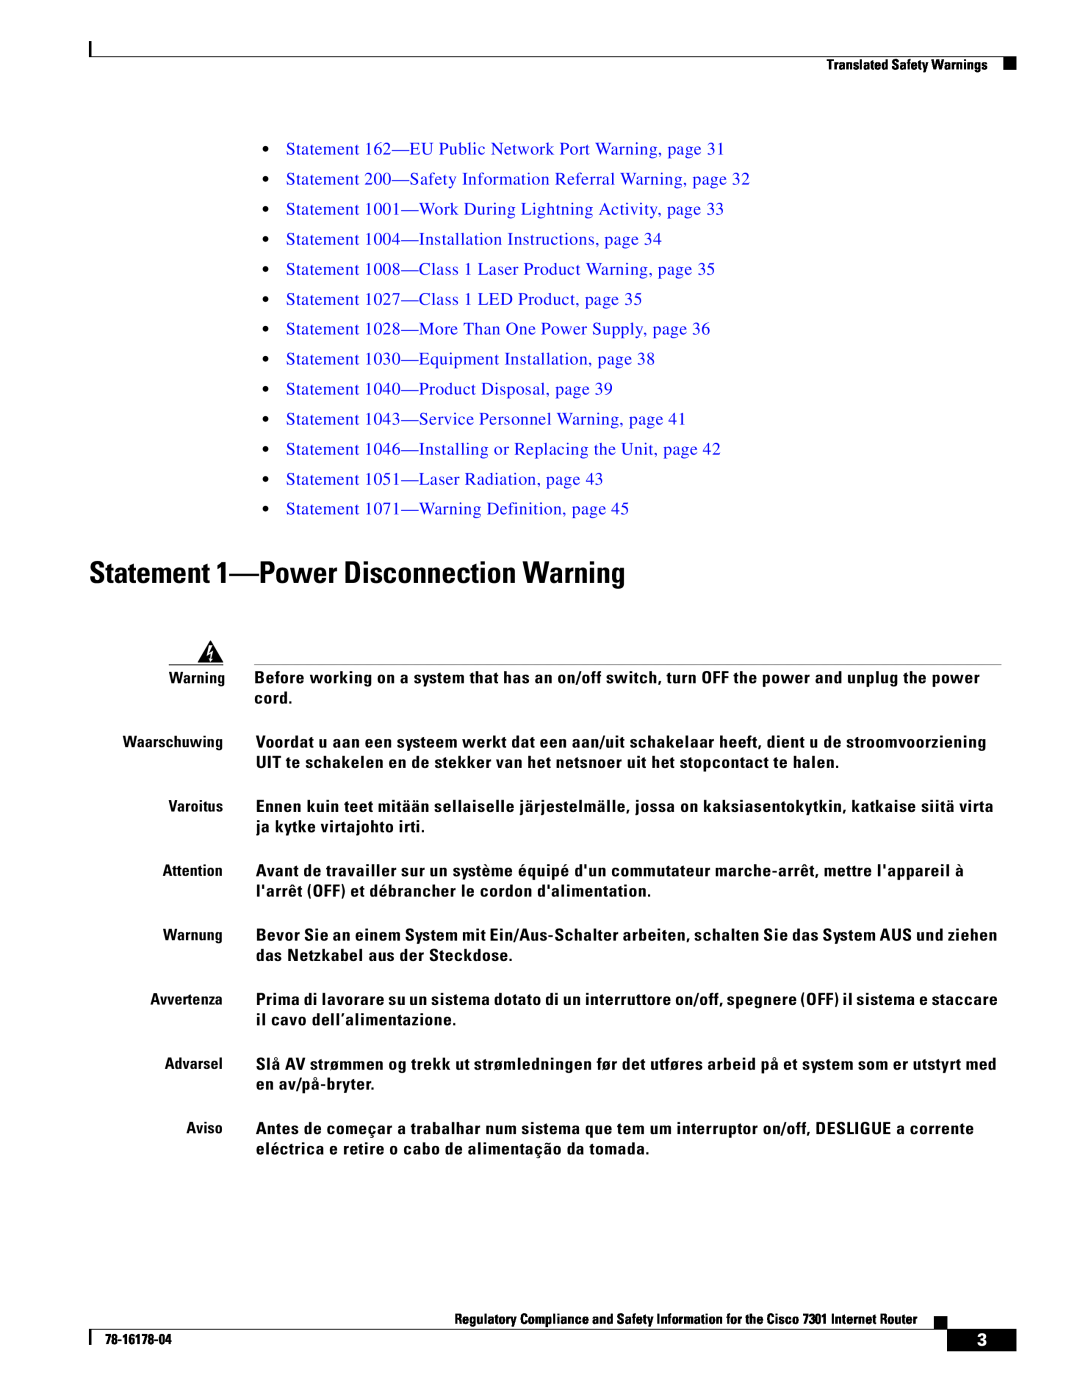 Cisco Systems CISCO7301 manual Statement 1-Power Disconnection Warning 